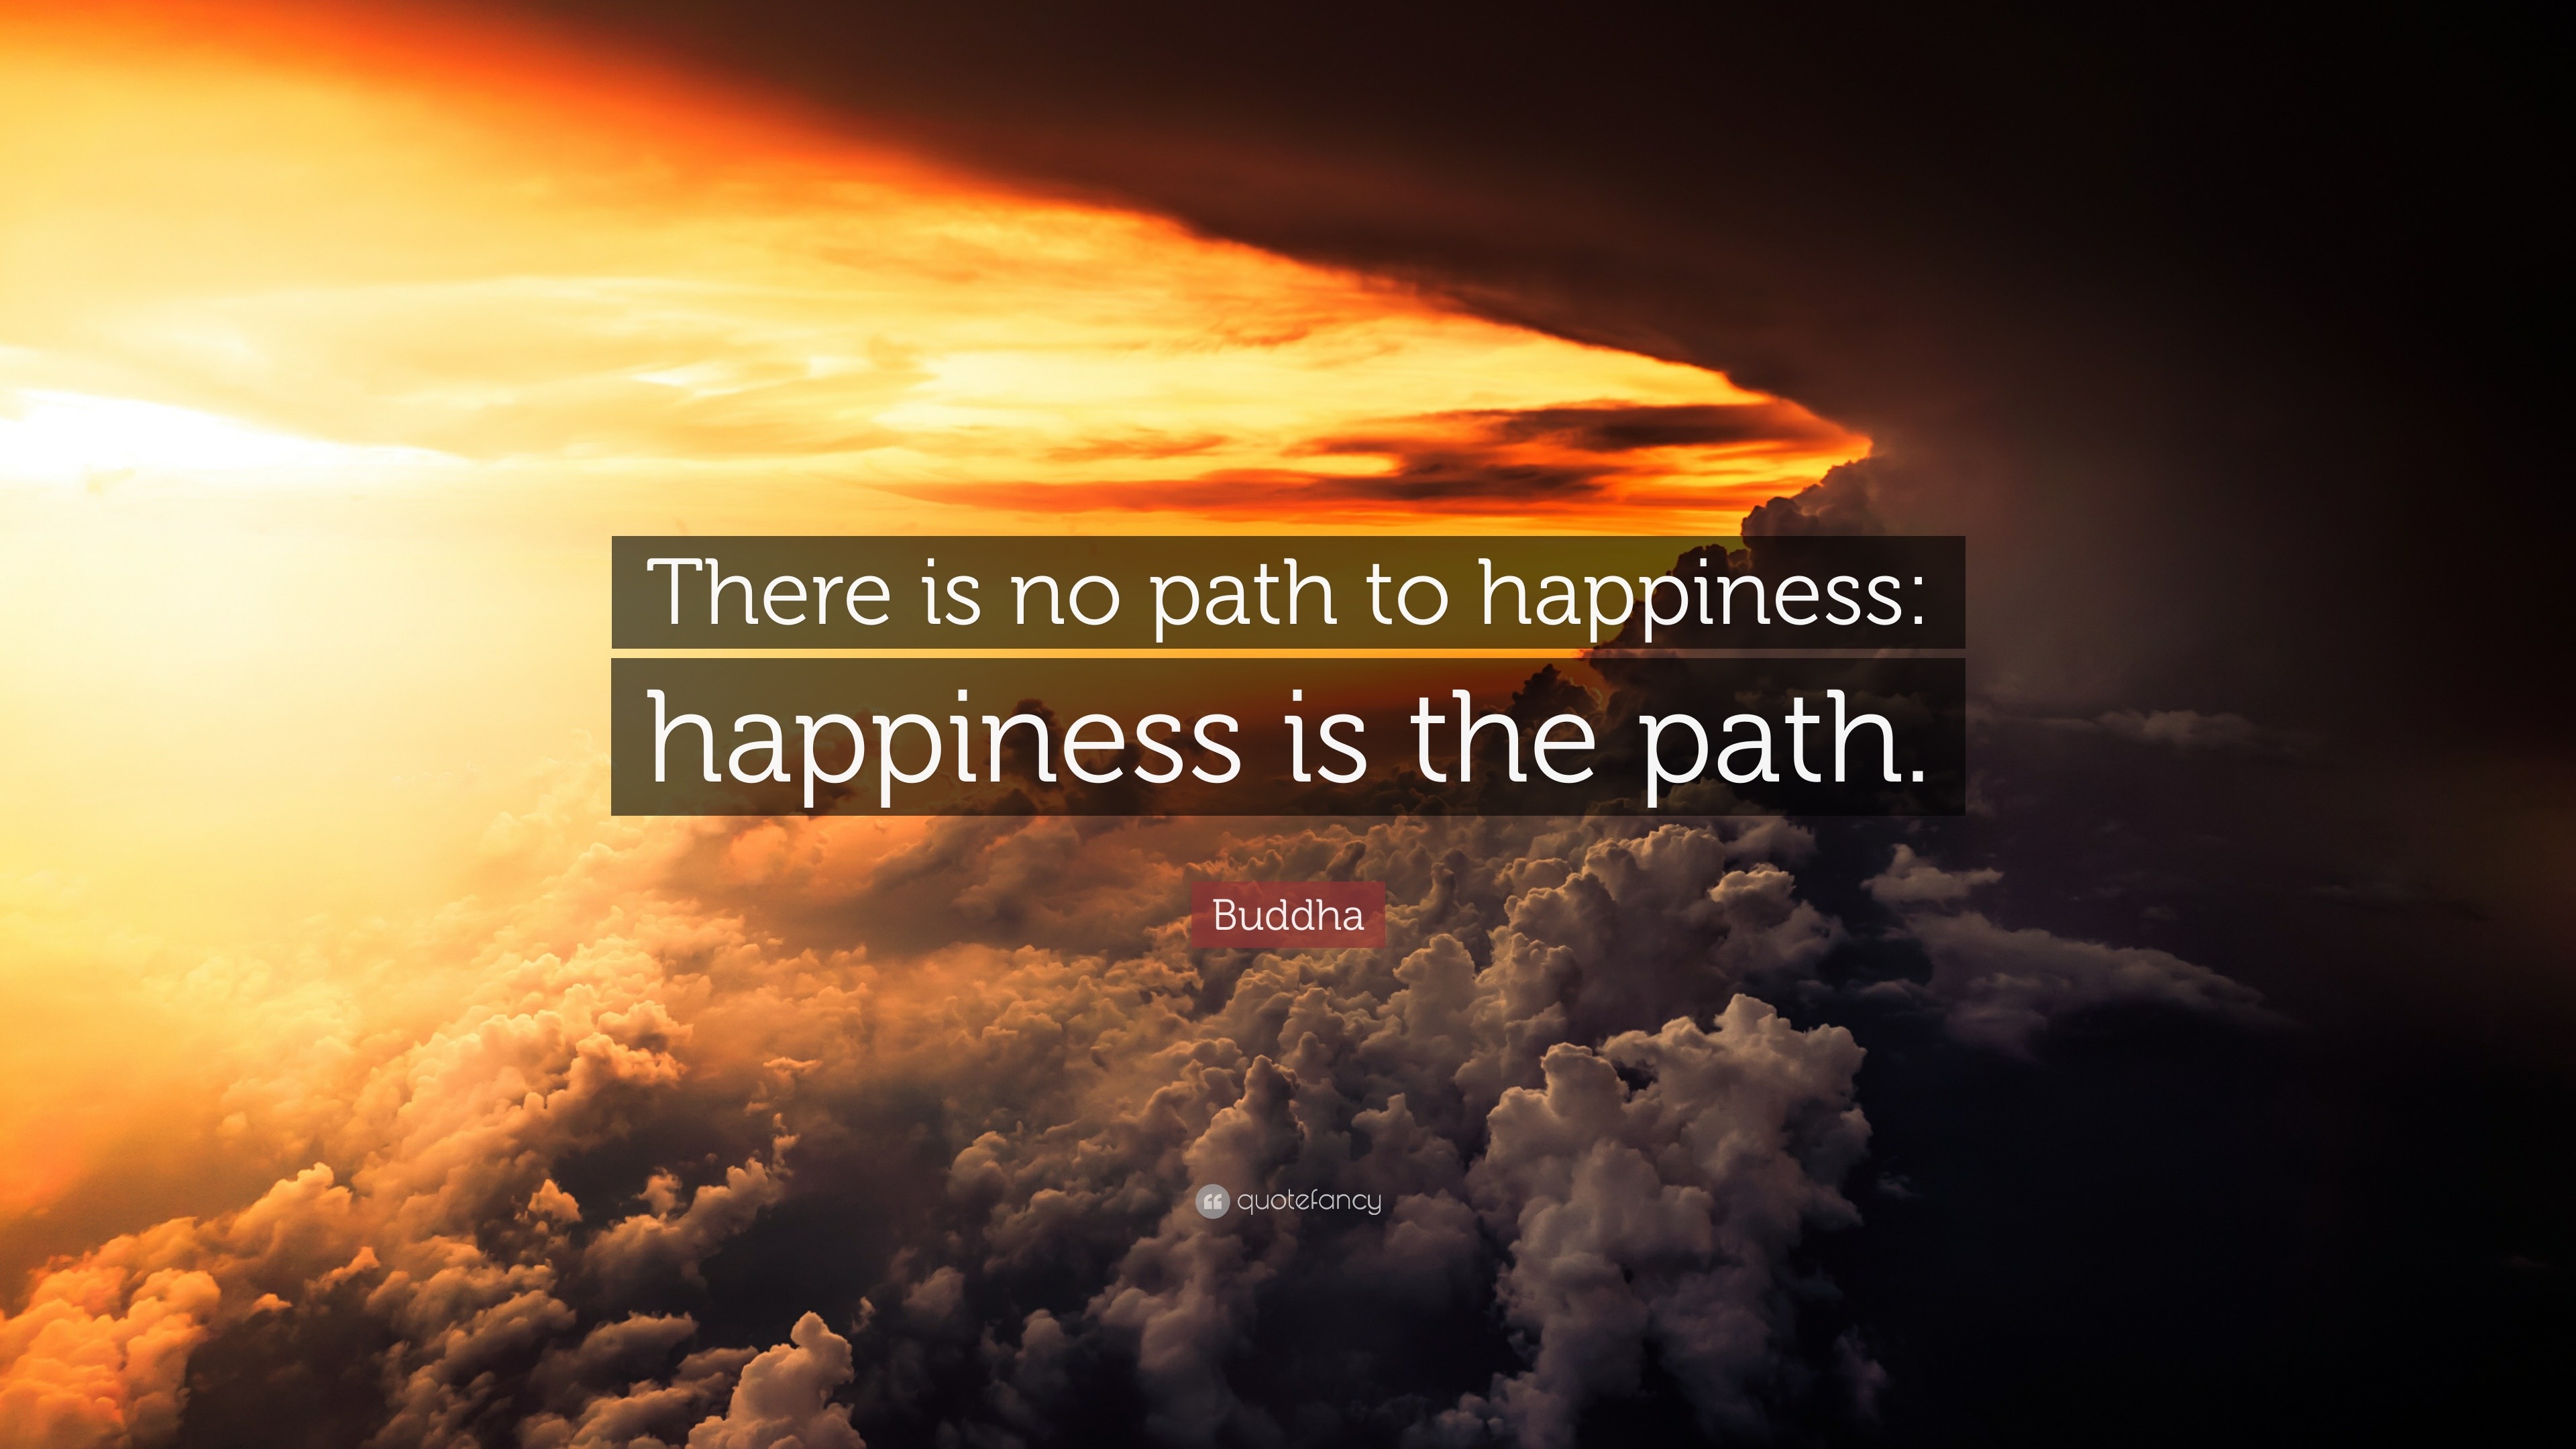 Buddha Quote: “There is no path to happiness: happiness is the path